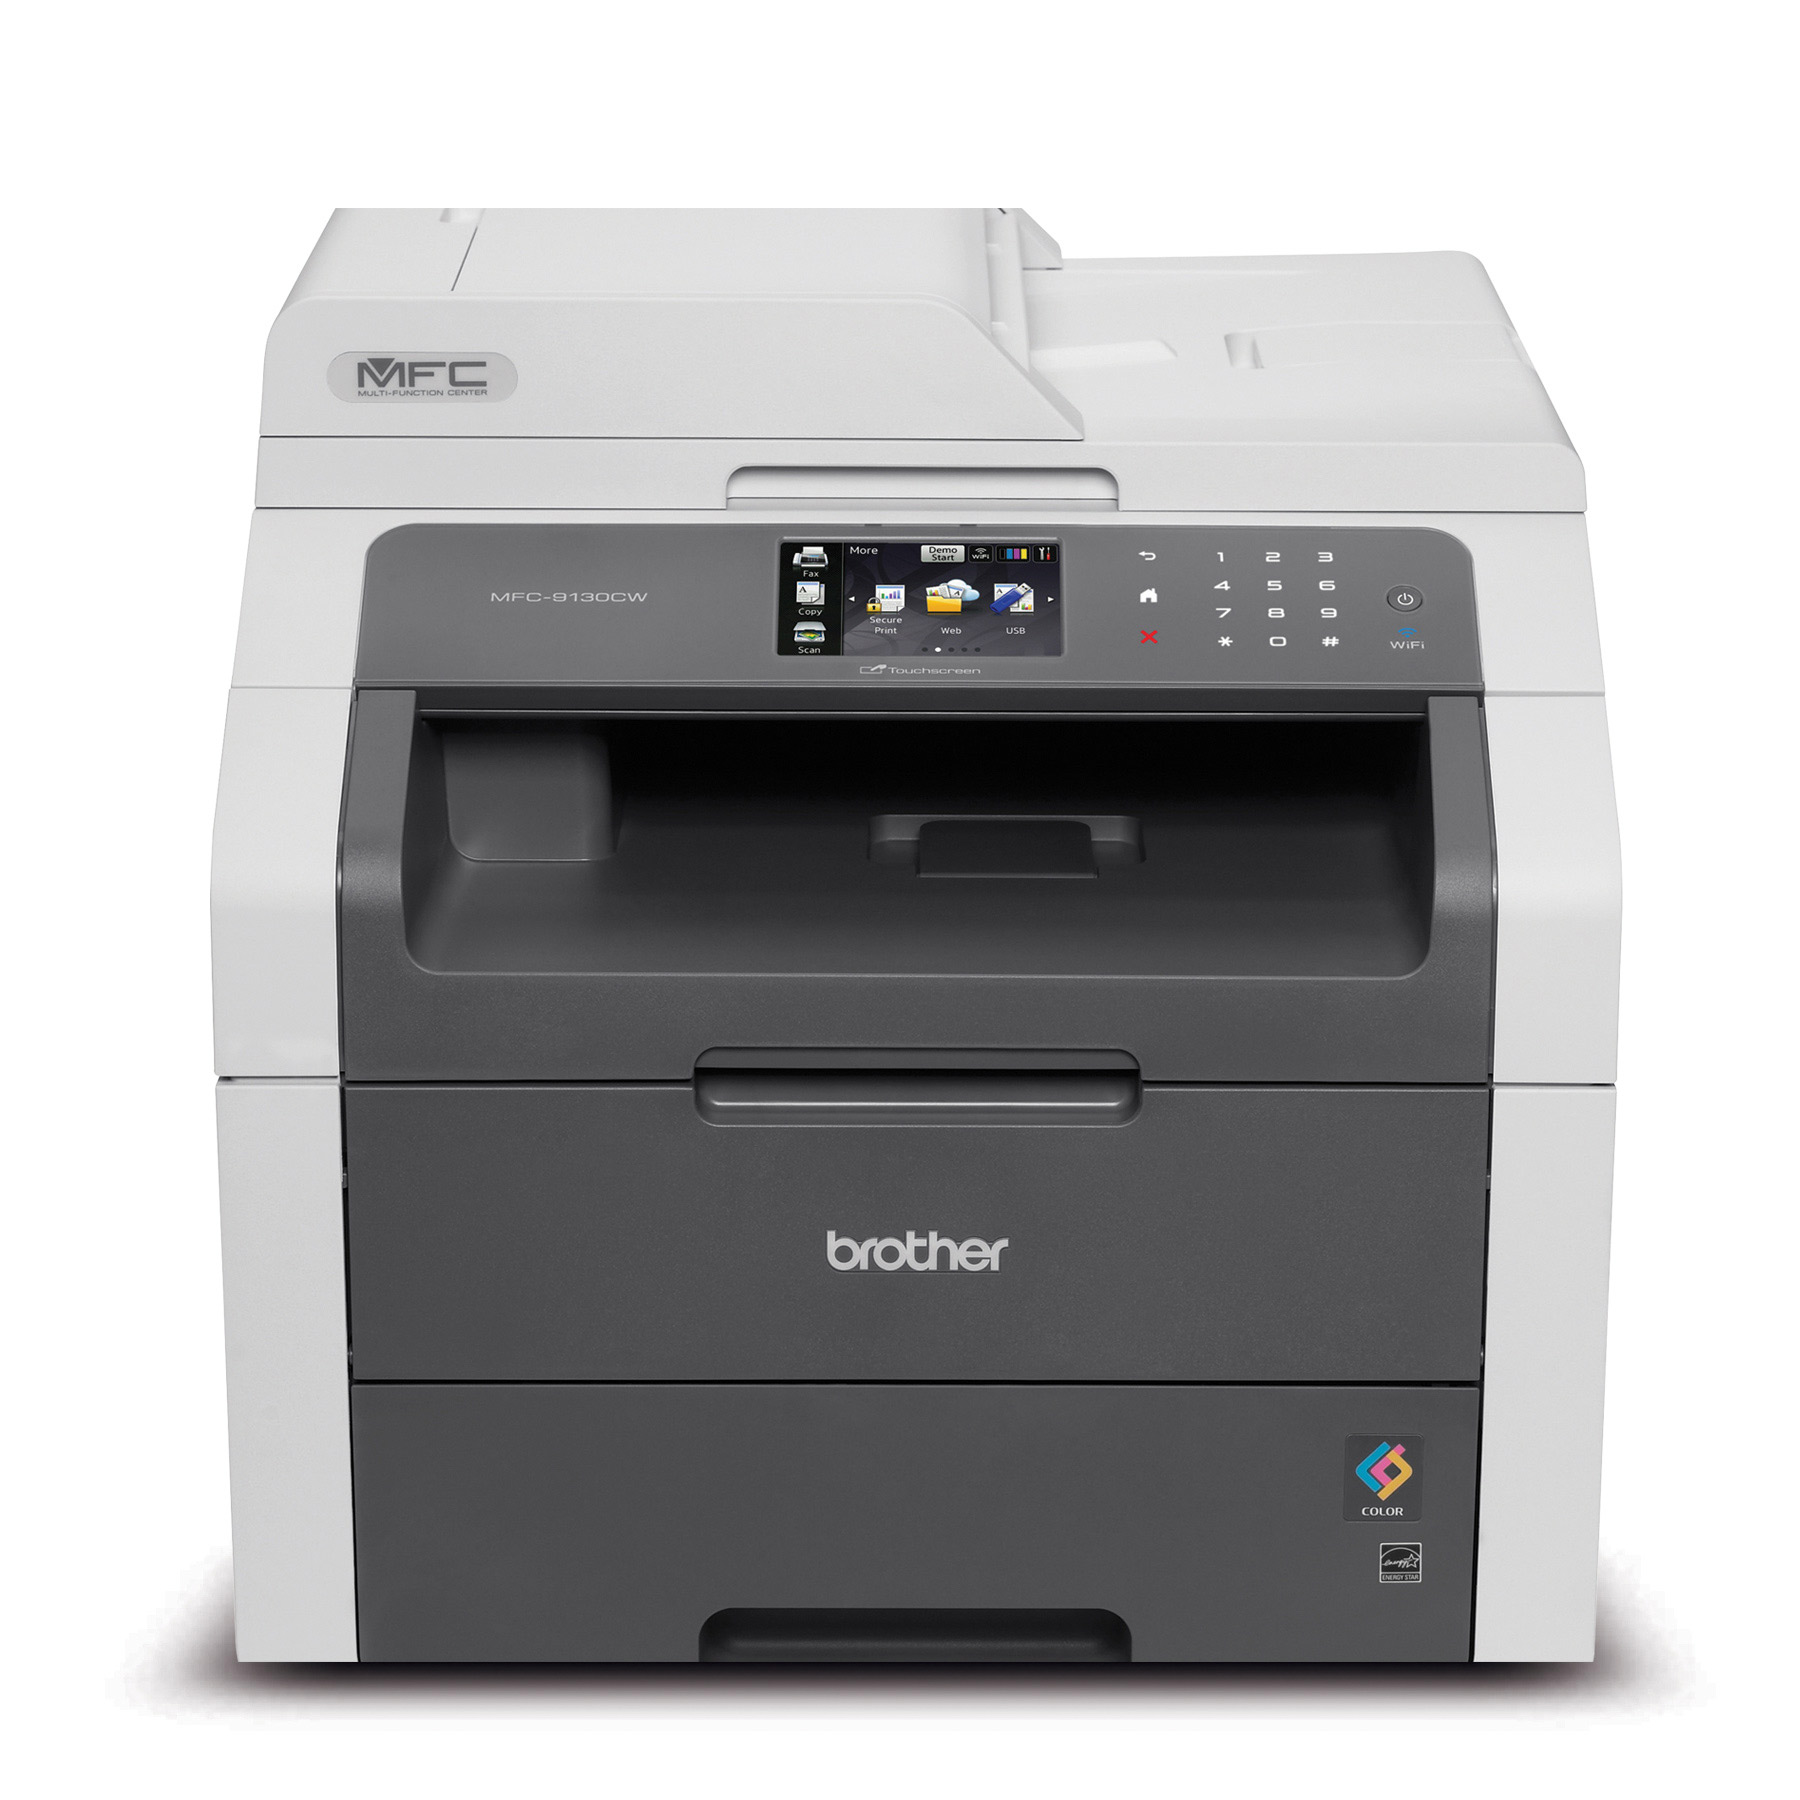 Image of Brother MFC-9130CW Digital Colour Multifunction